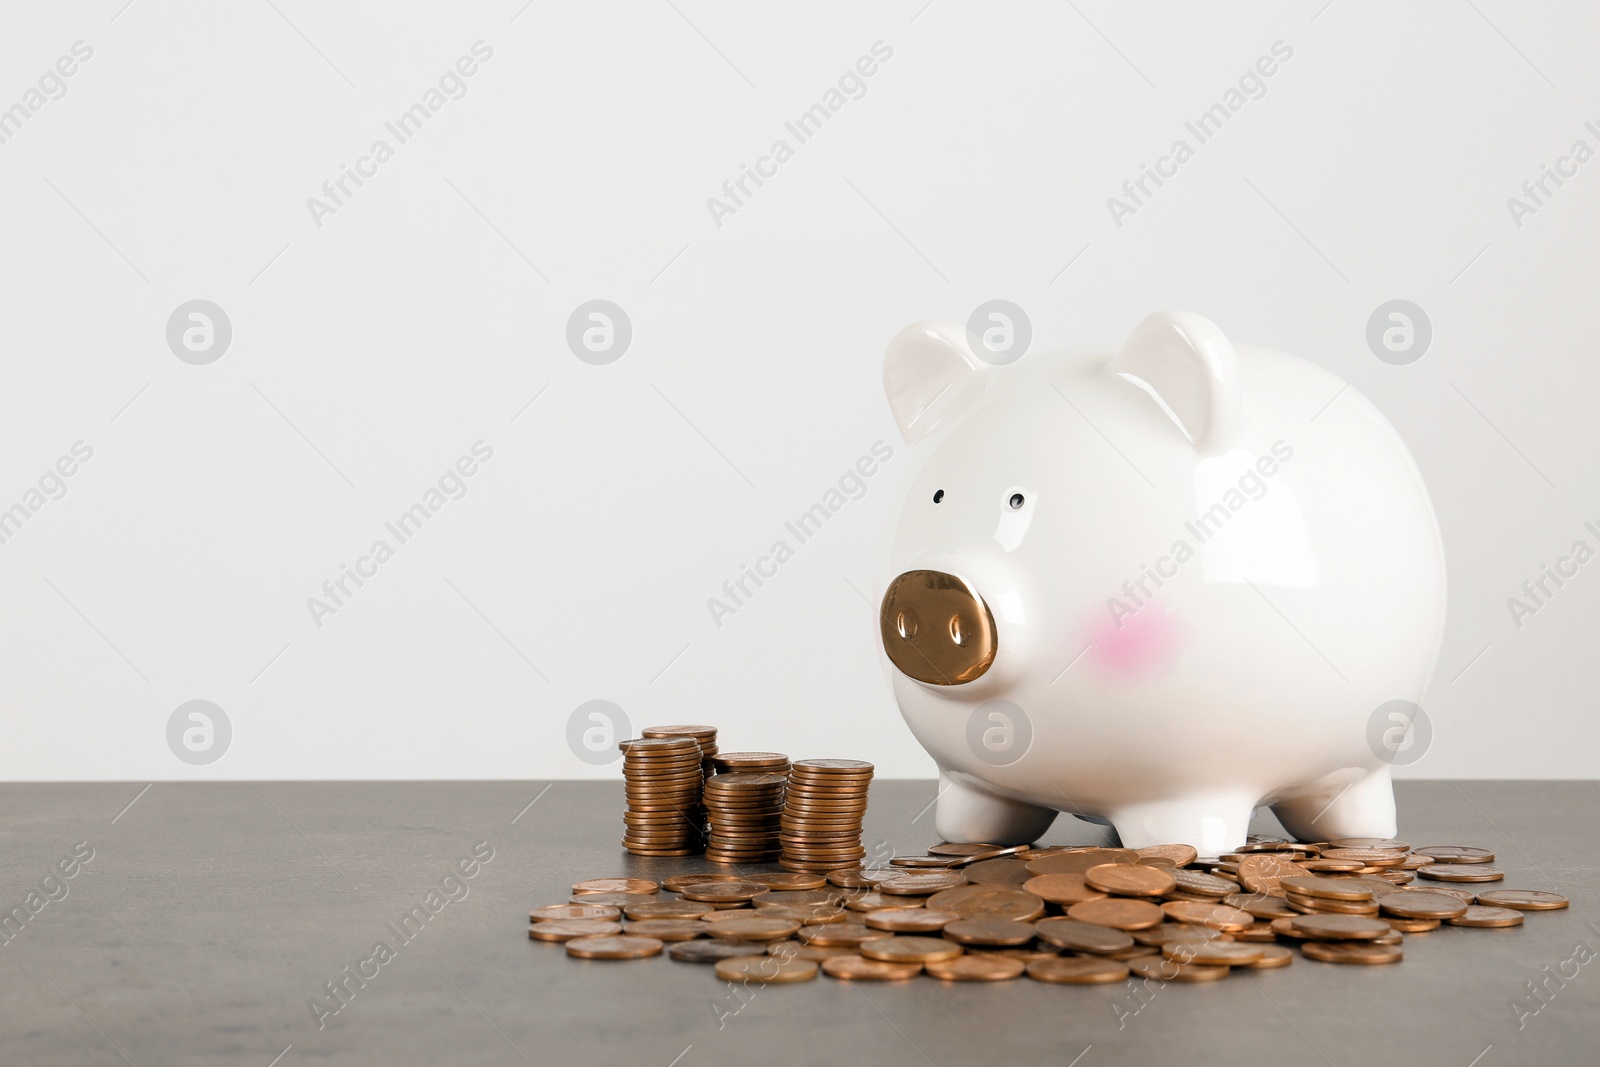 Photo of Piggy bank and coins on table against white background. Space for text